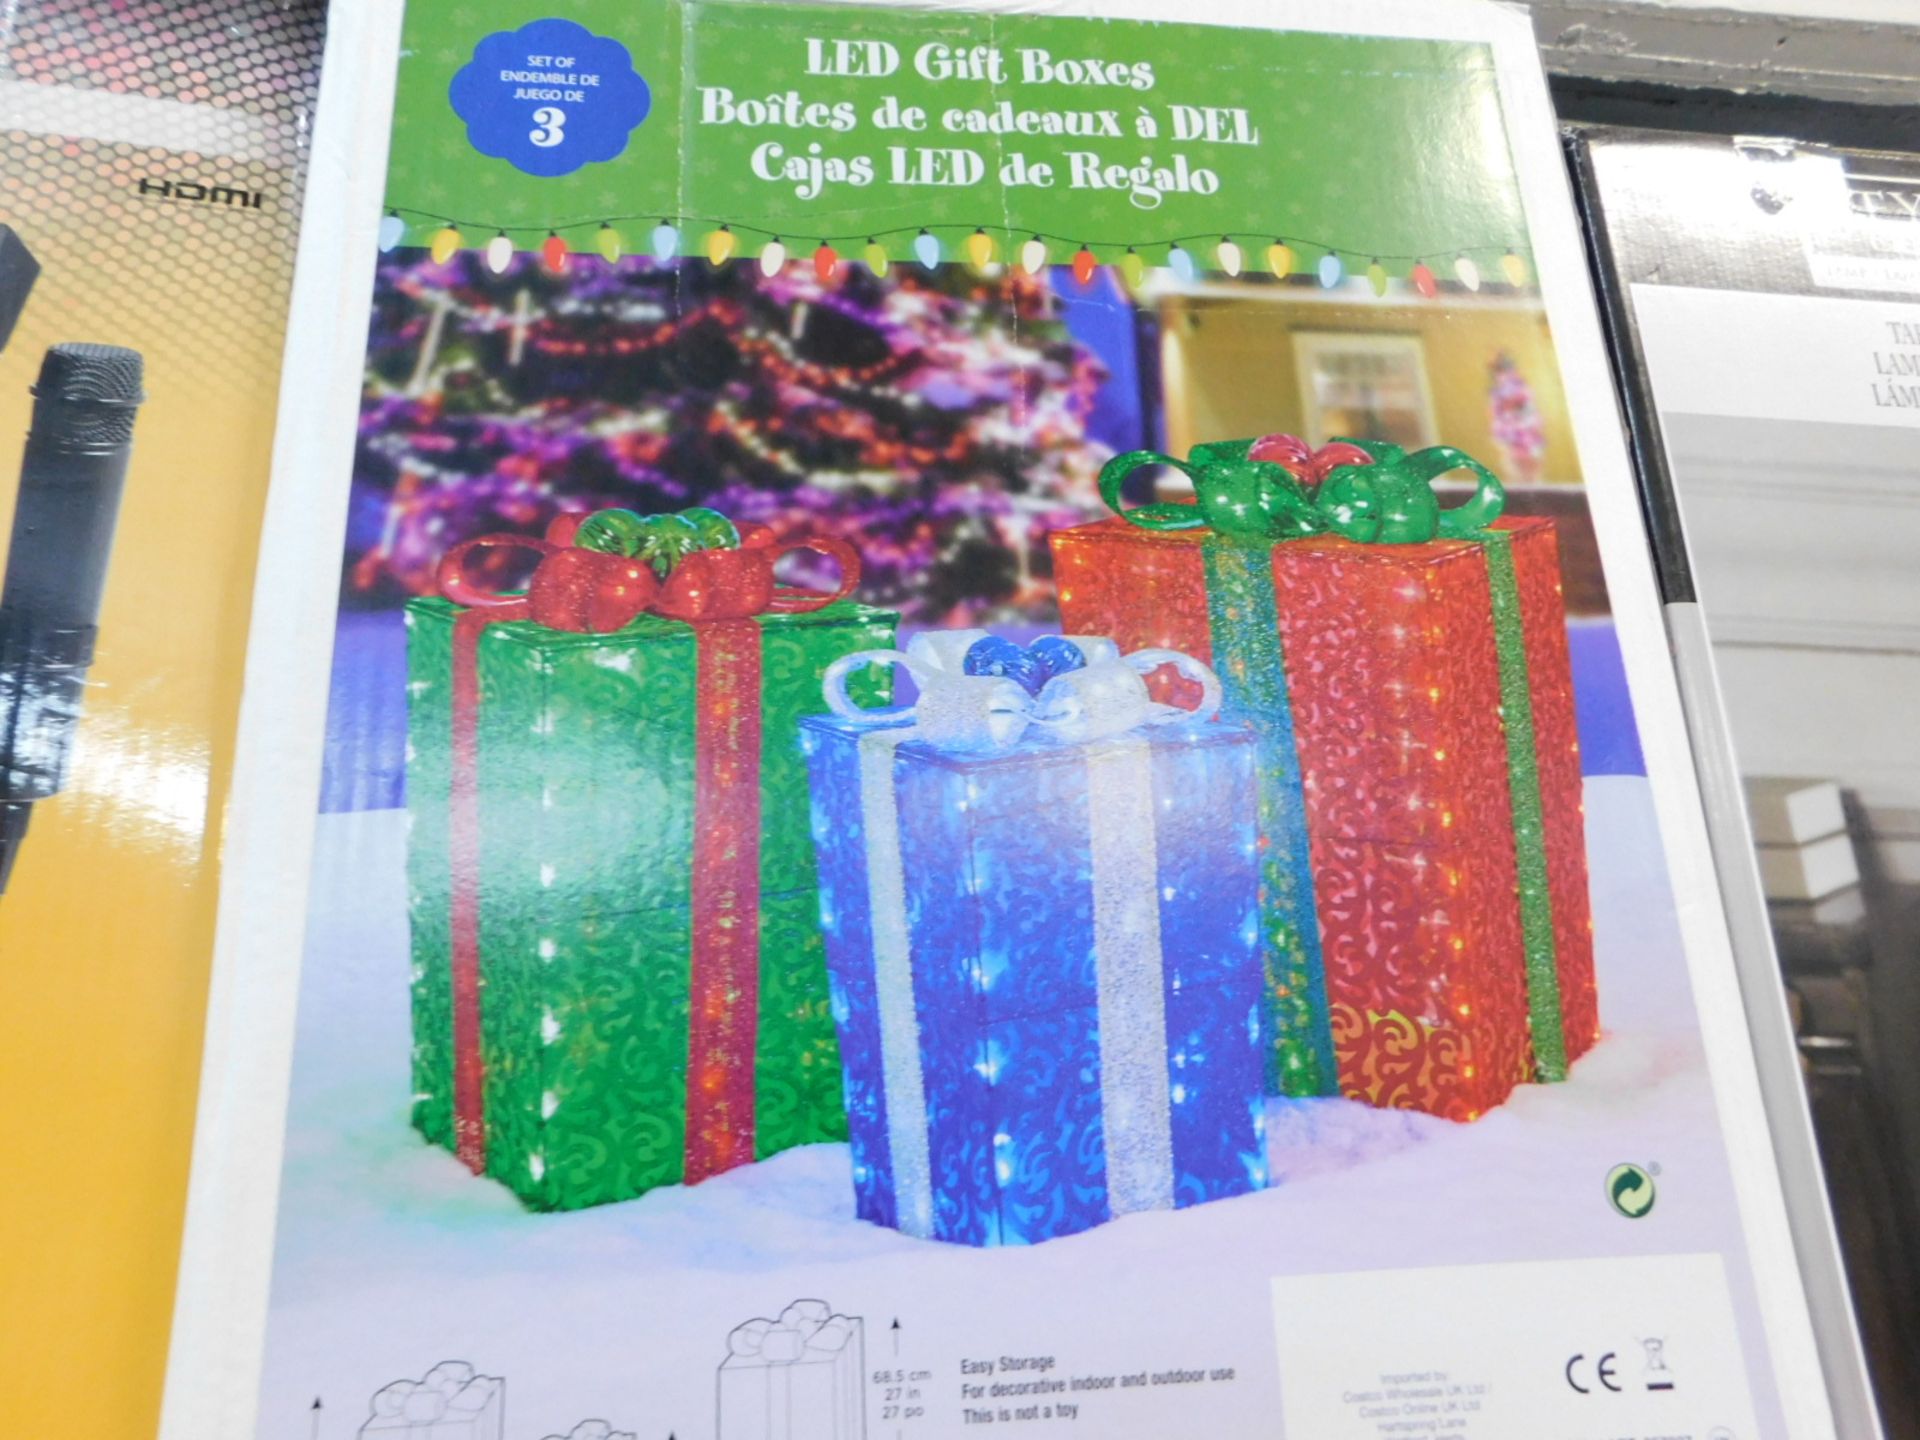 1 BOXED SET OF 3 LED GIFT BOXES RRP Â£49.99